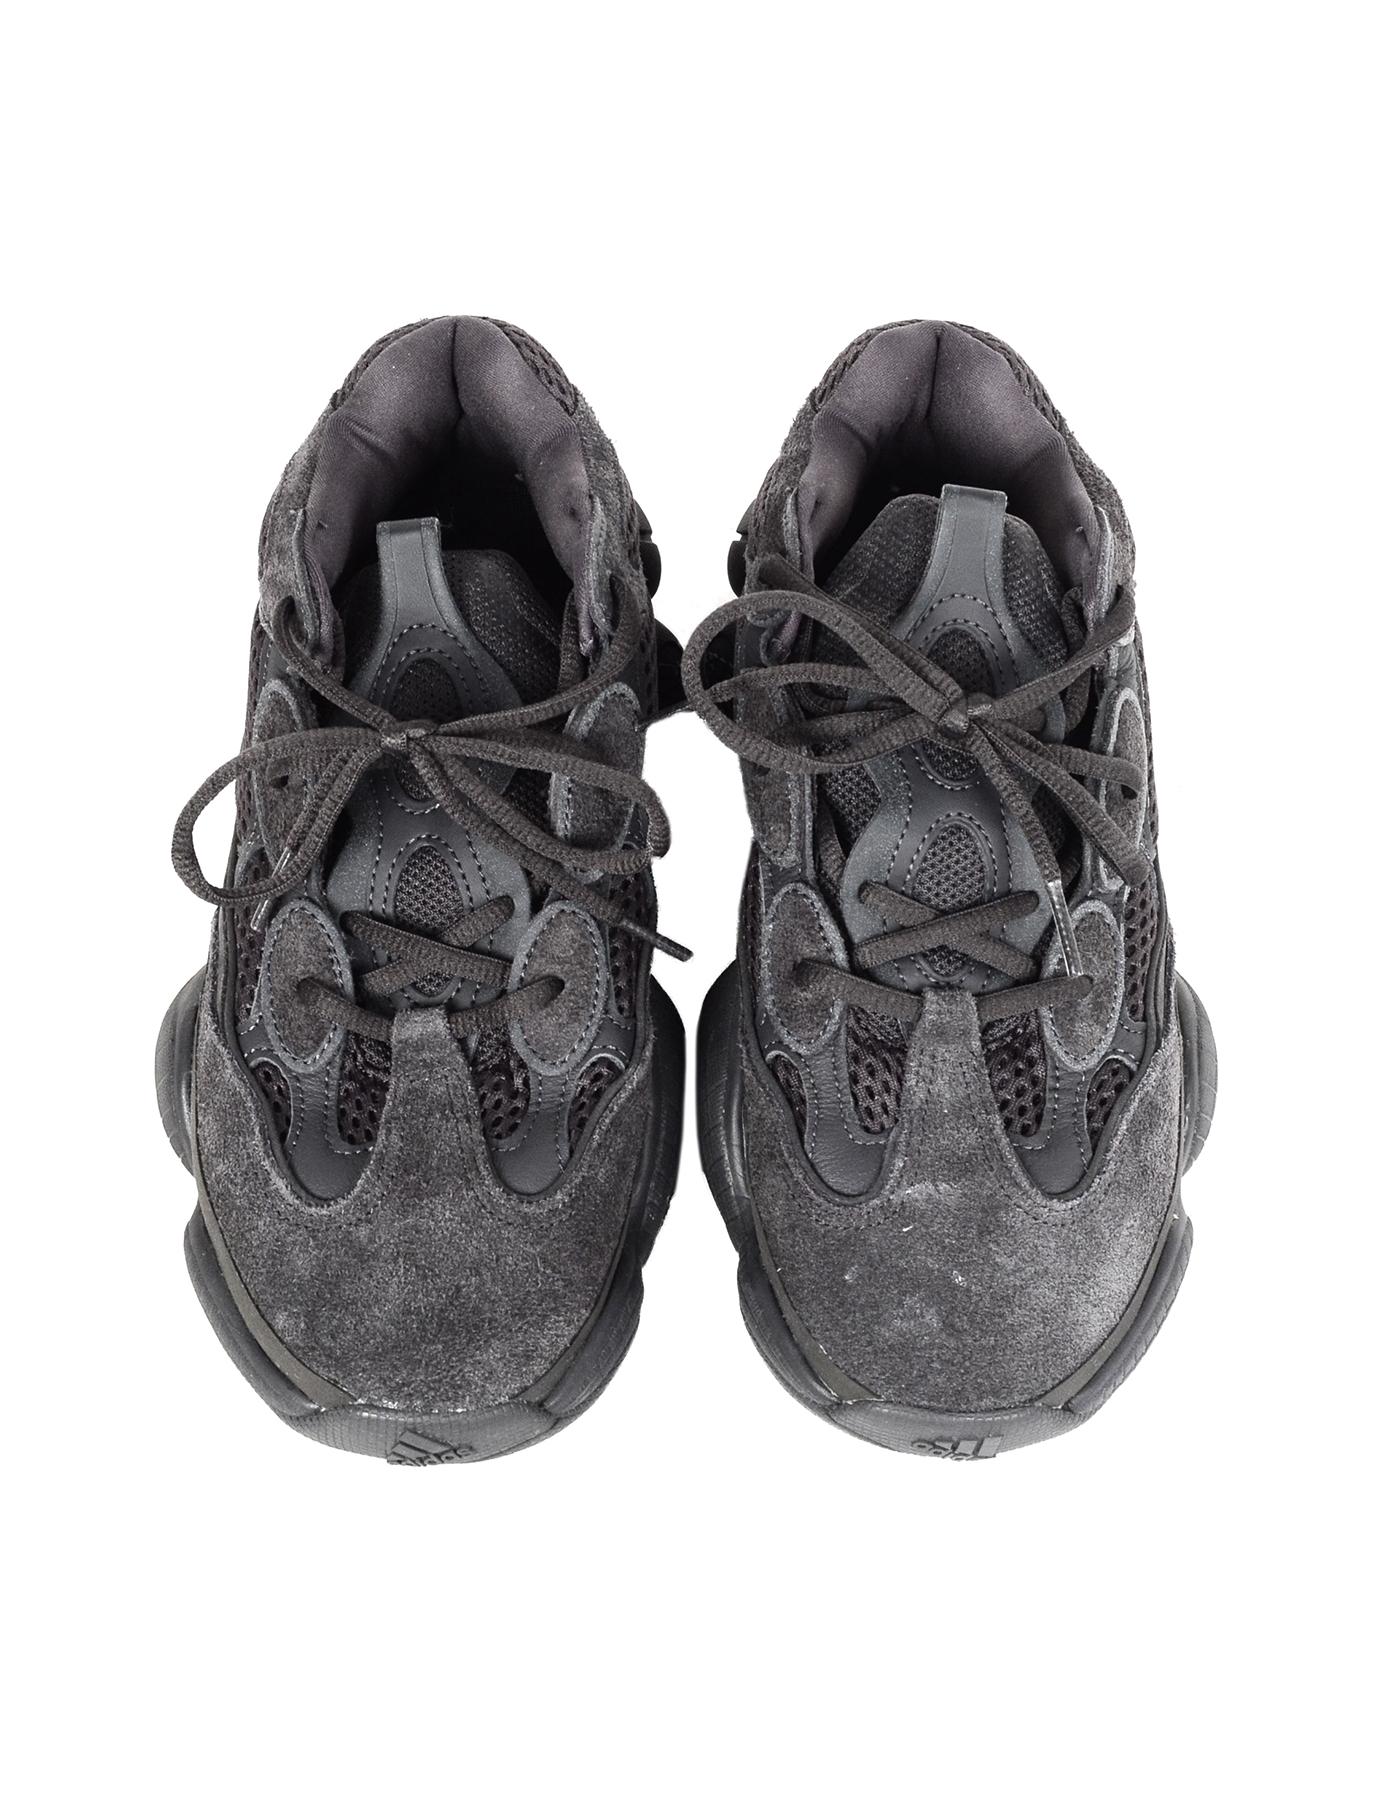 Adidas x Yeezy Unisex 2018 500 Desert Rat Utility Black Sneakers Sz M 7, W 8.5 In Excellent Condition In New York, NY